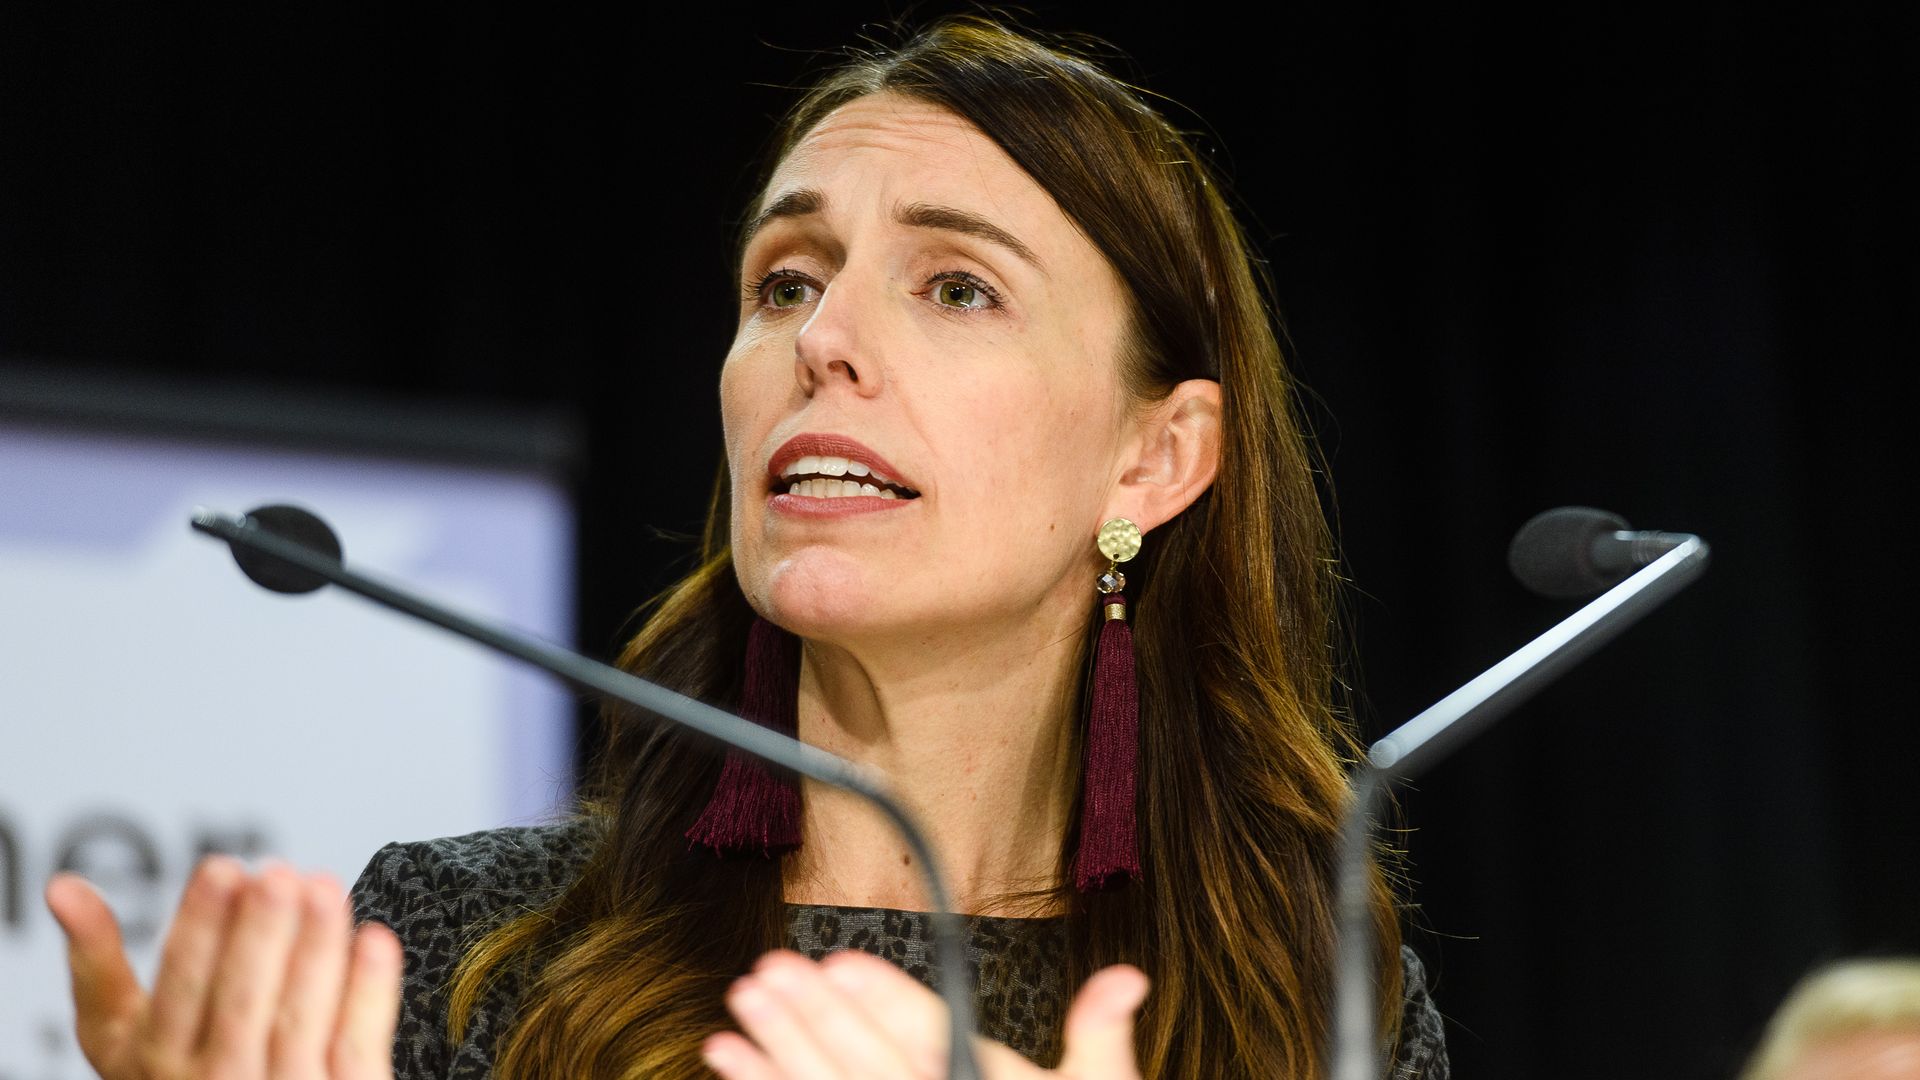 Jacinda Ardern, New Zealand's prime minister, during a news conference in Wellington, New Zealand, on Tuesday, April 6